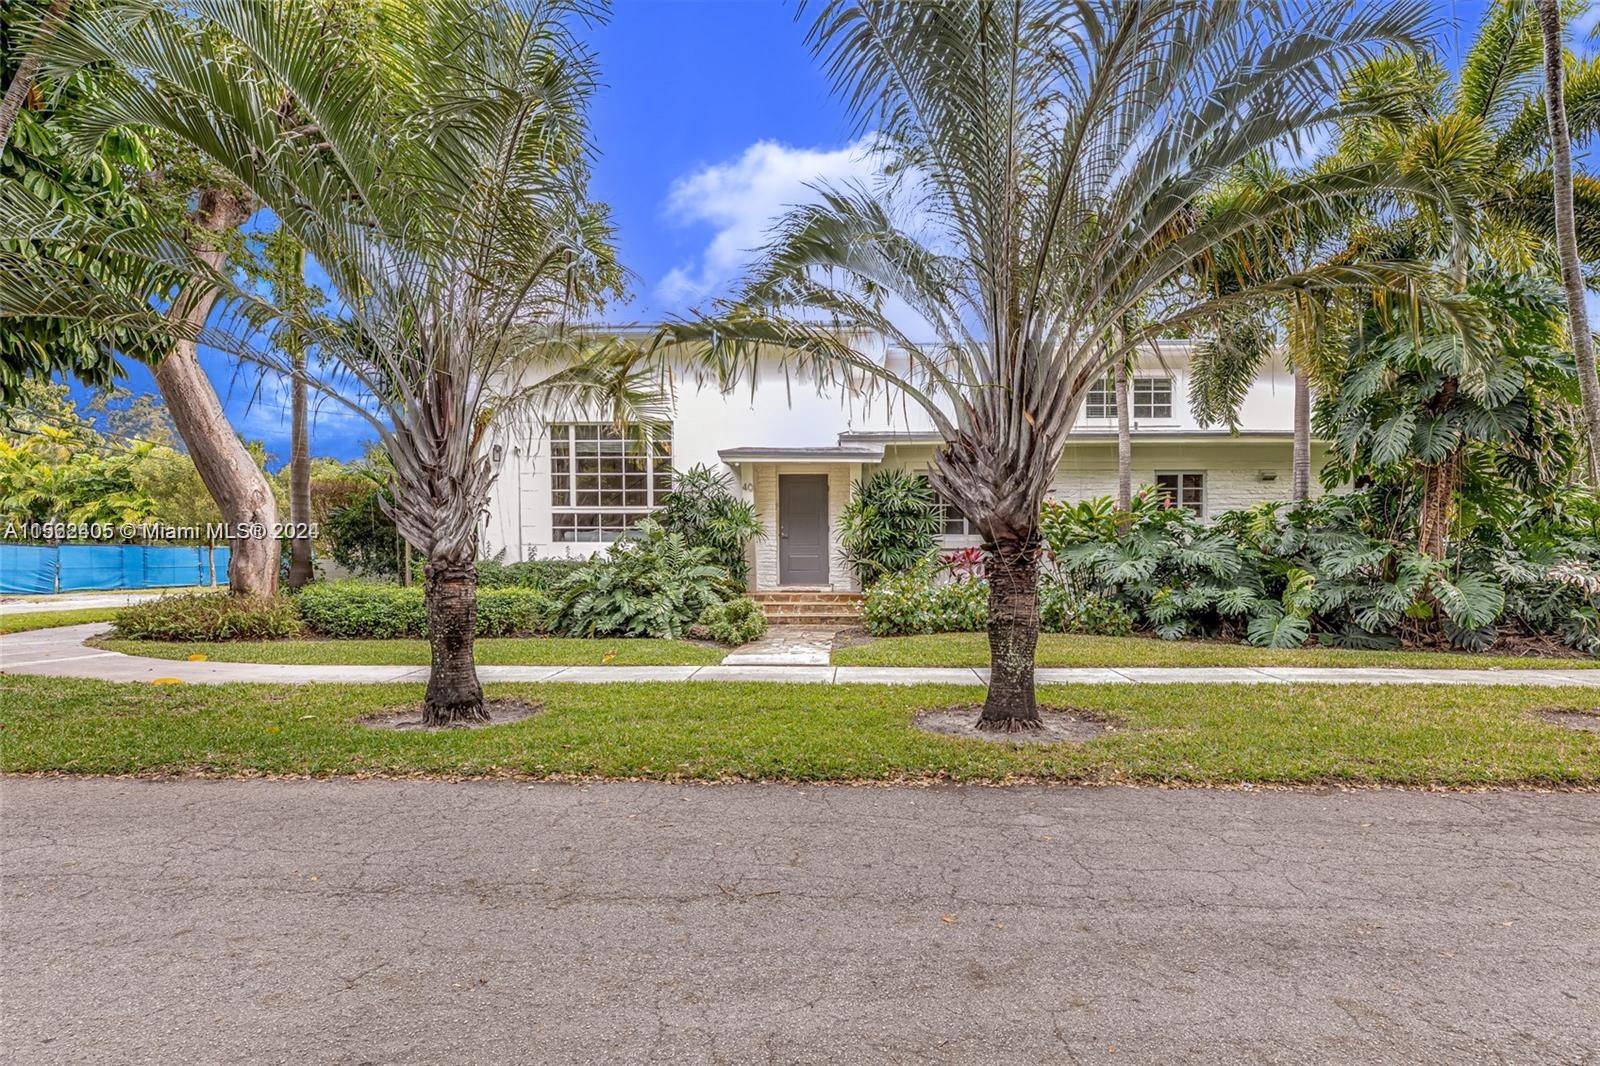 Live at this gorgeous and modern 2 story home on an over 9, 100 SF lot located in the prestigious North Coconut Grove neighborhood.